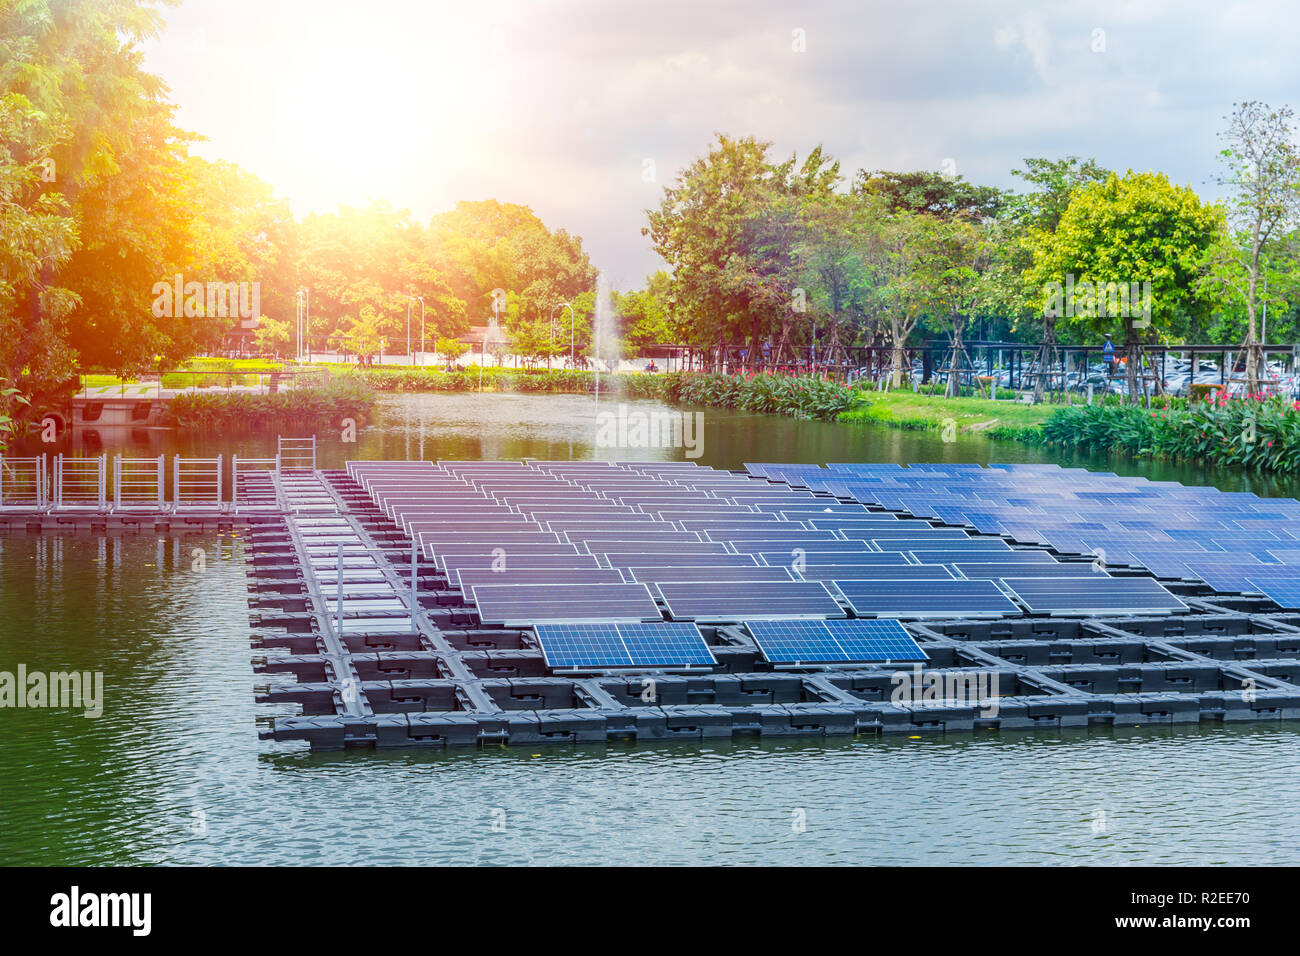 Floating solar panels or solar cell Platform on the water lake pond for saving energy technology innovation. Stock Photo